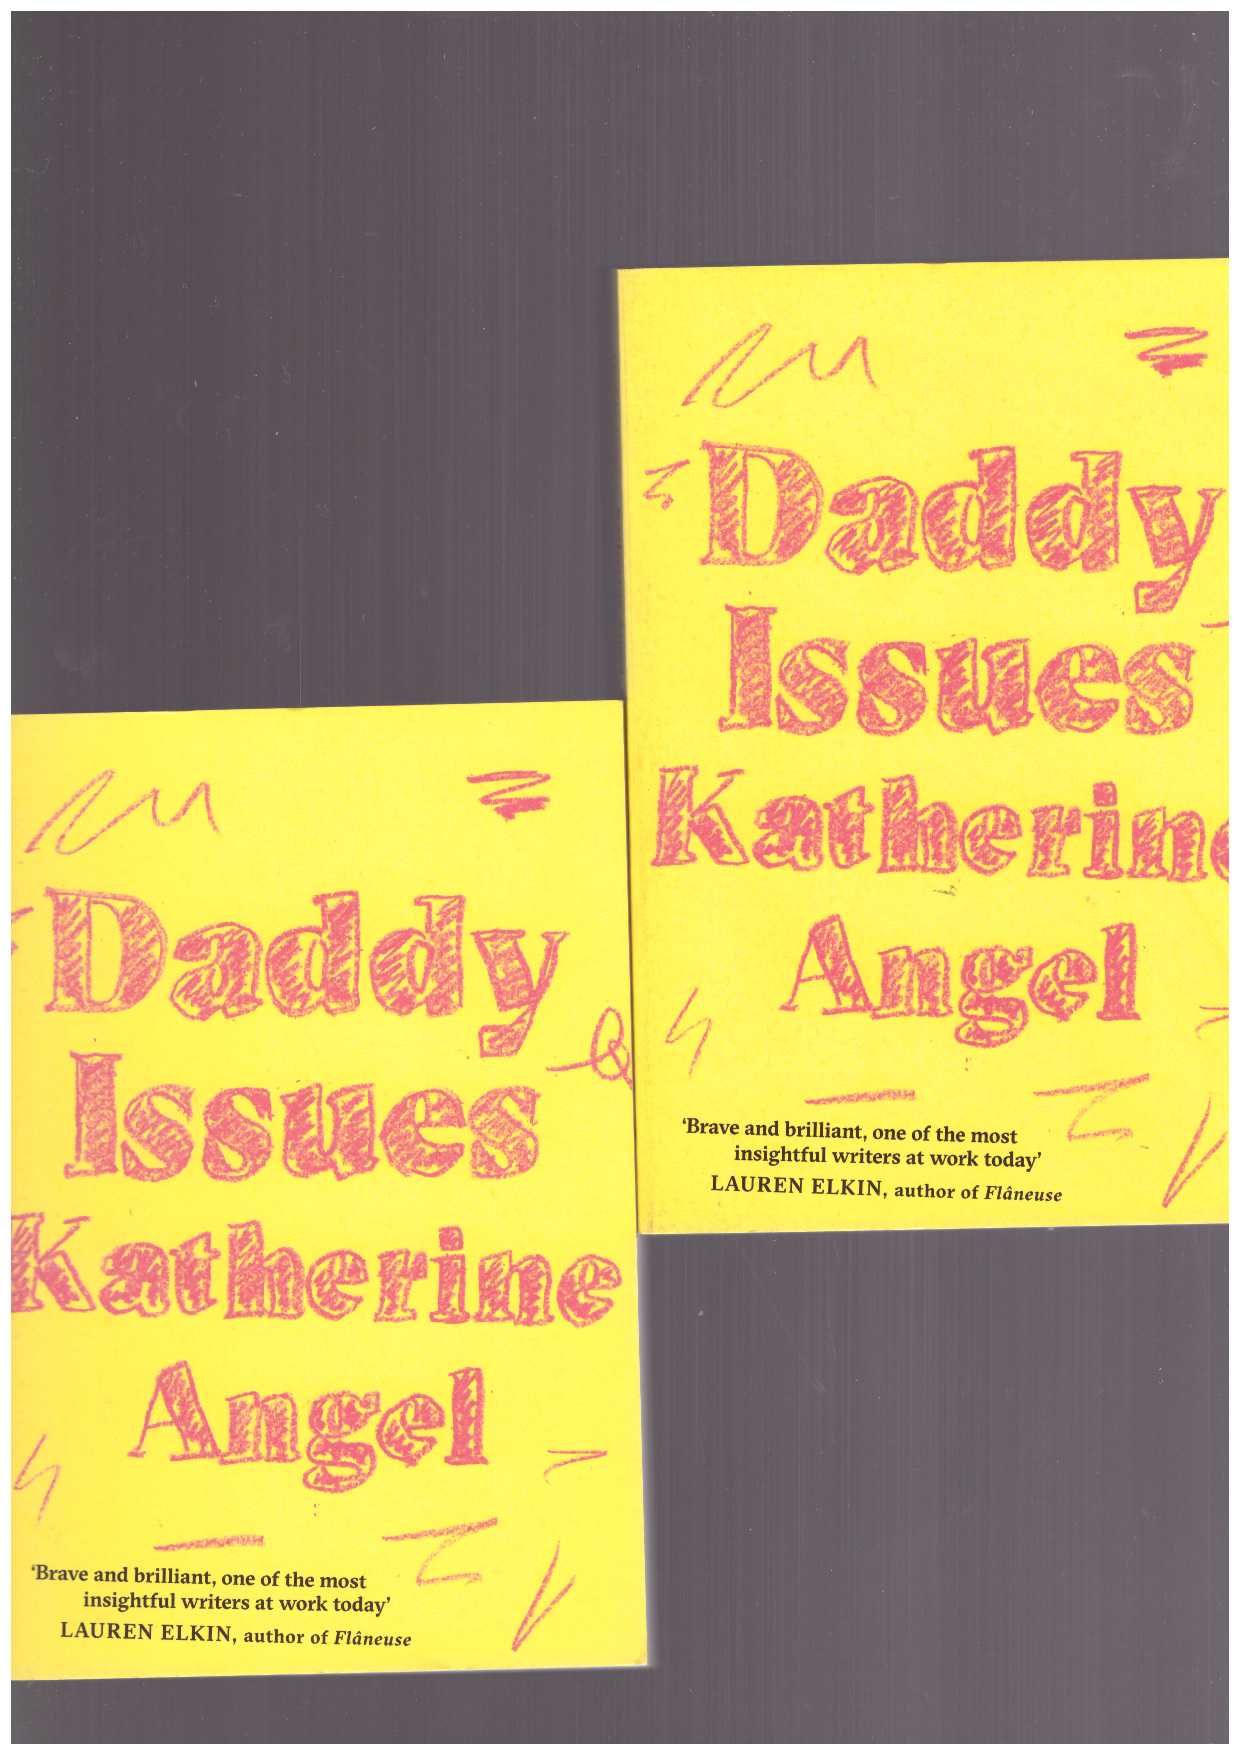 ANGEL, Katherine - Daddy Issues